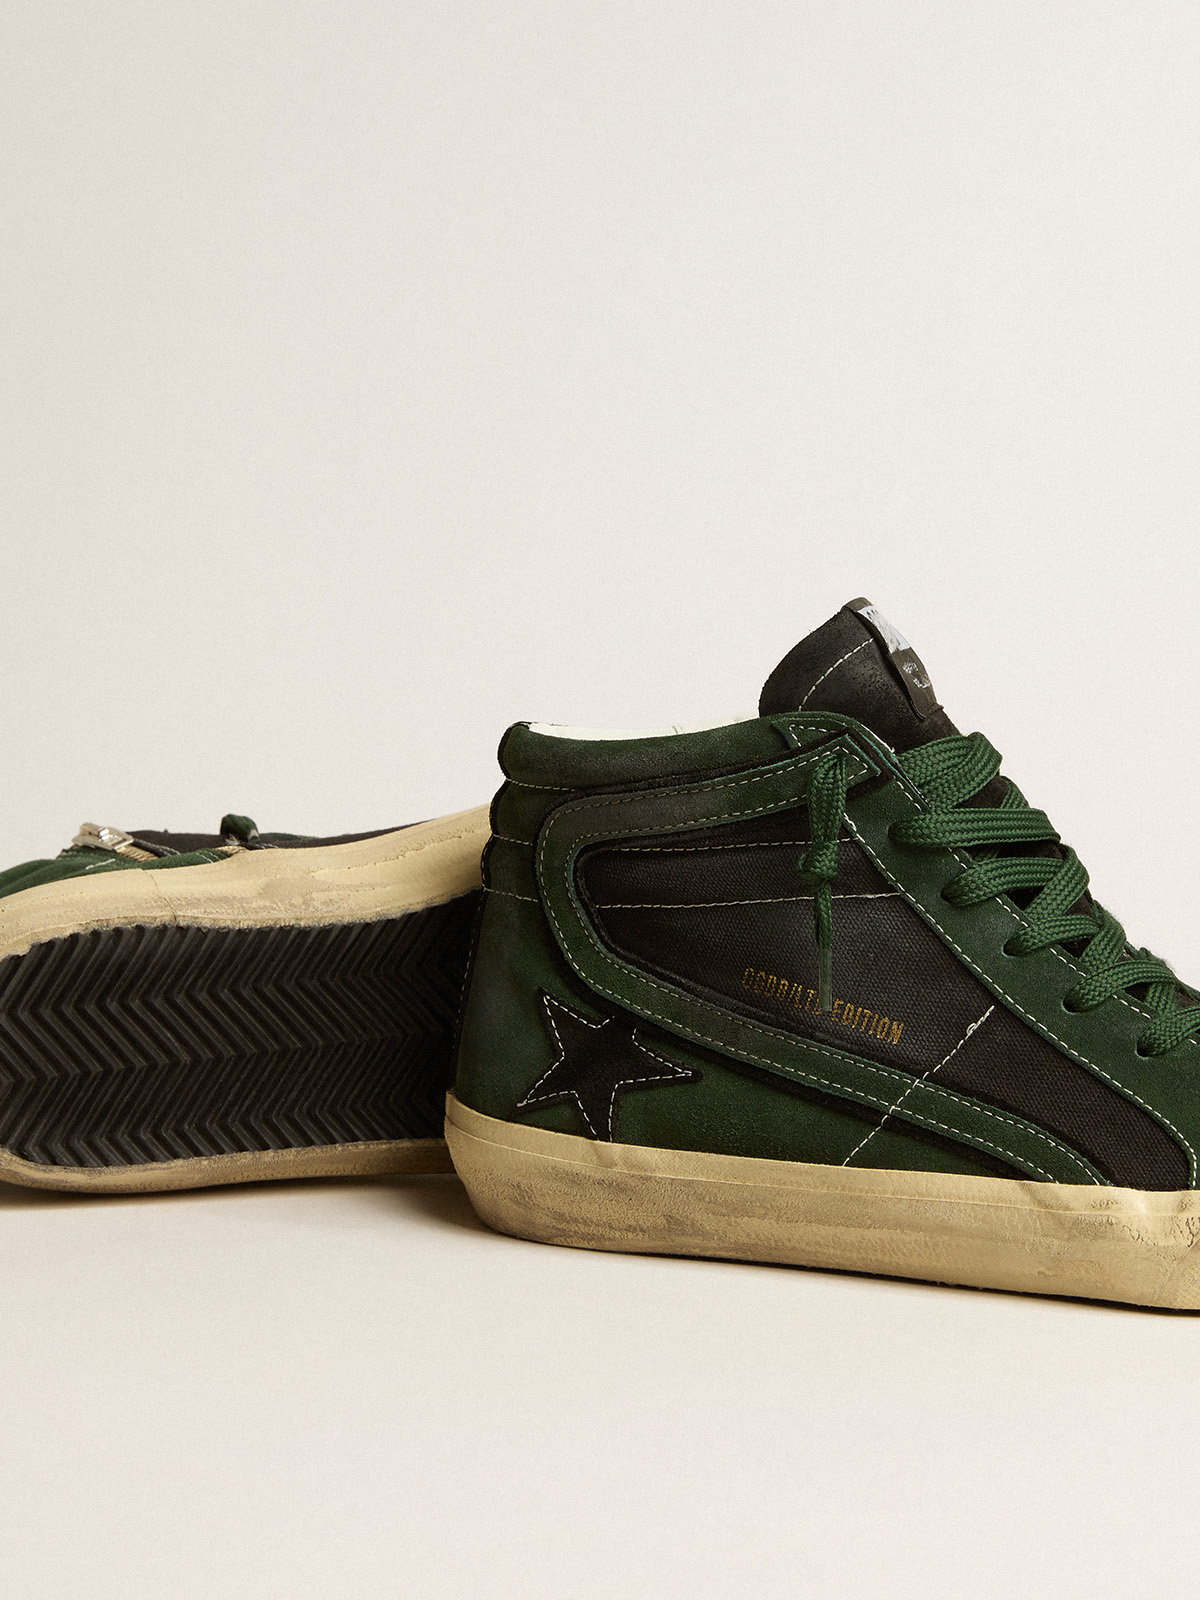 Slide LTD in green suede and black canvas with suede star and flash |  Golden Goose